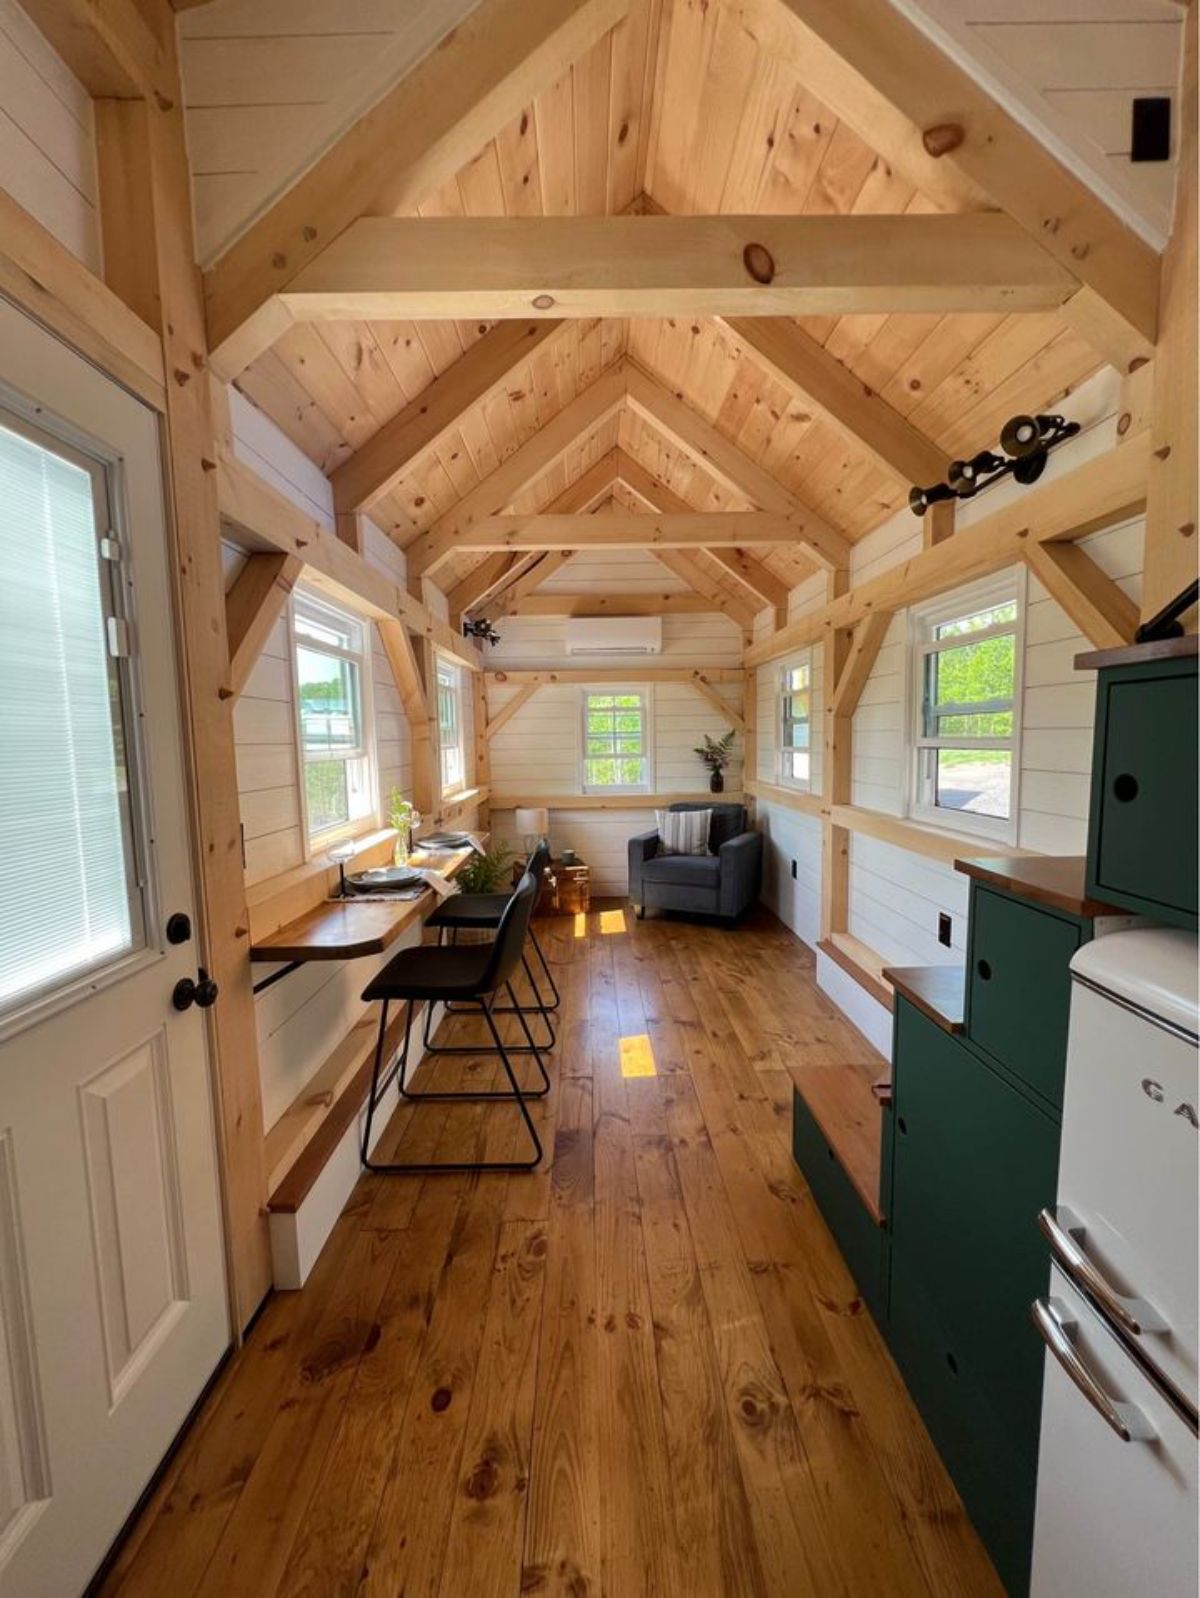 Classy wooden interiors of 26’ Timber Framed Tiny House